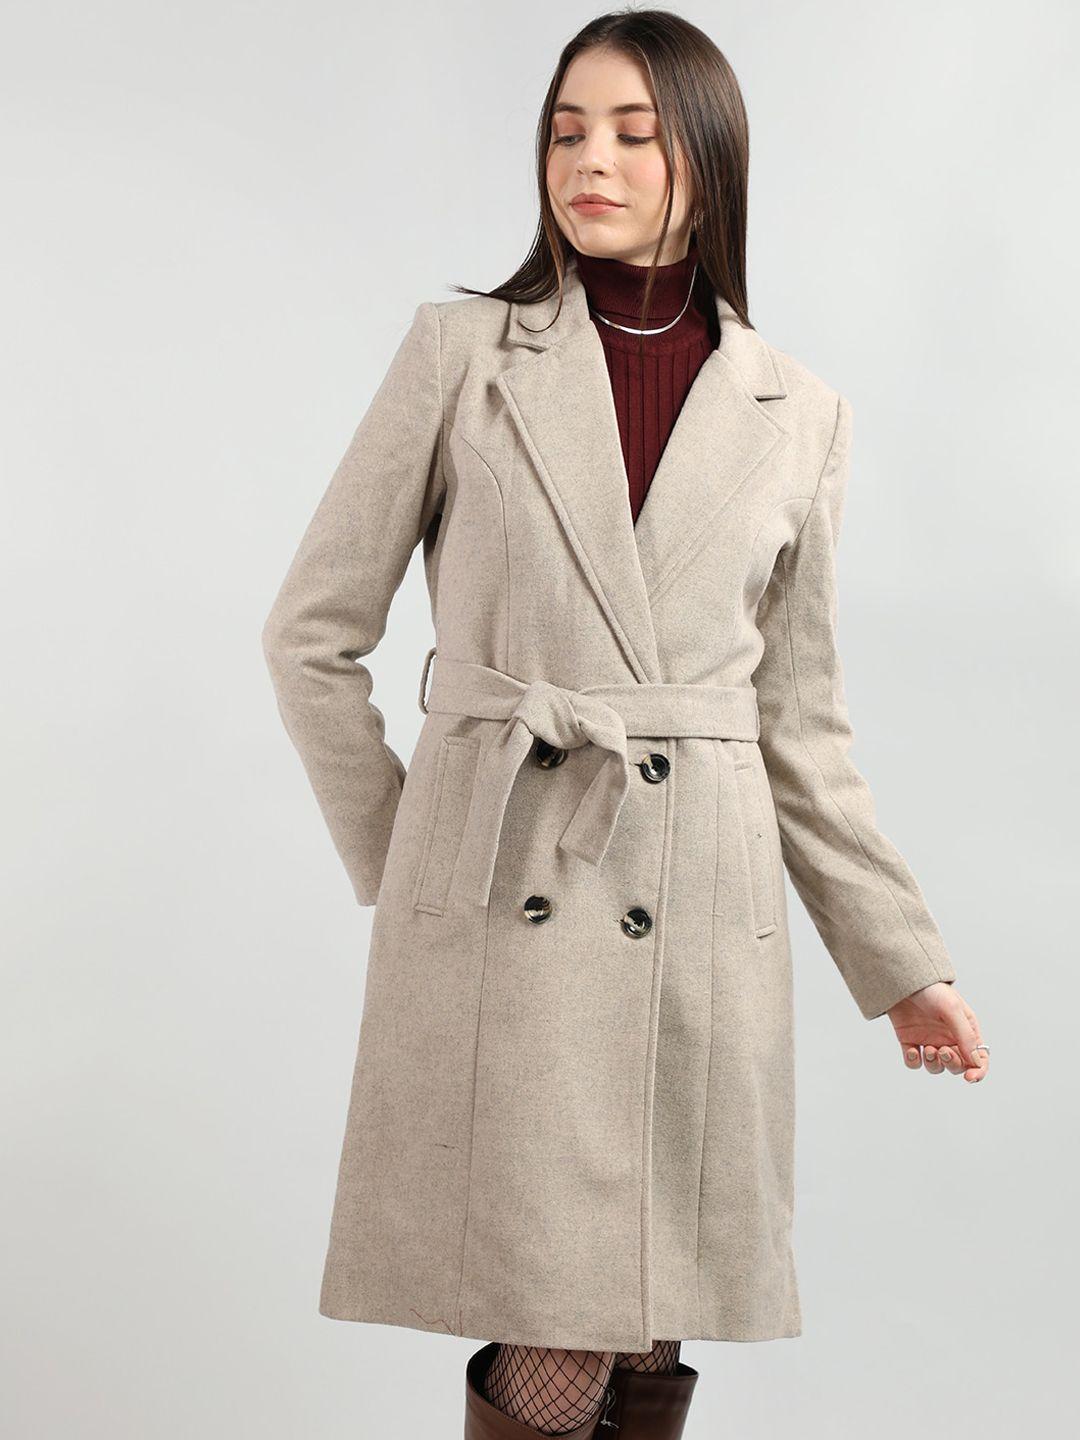 lebork notched lapel woollen double breasted overcoat